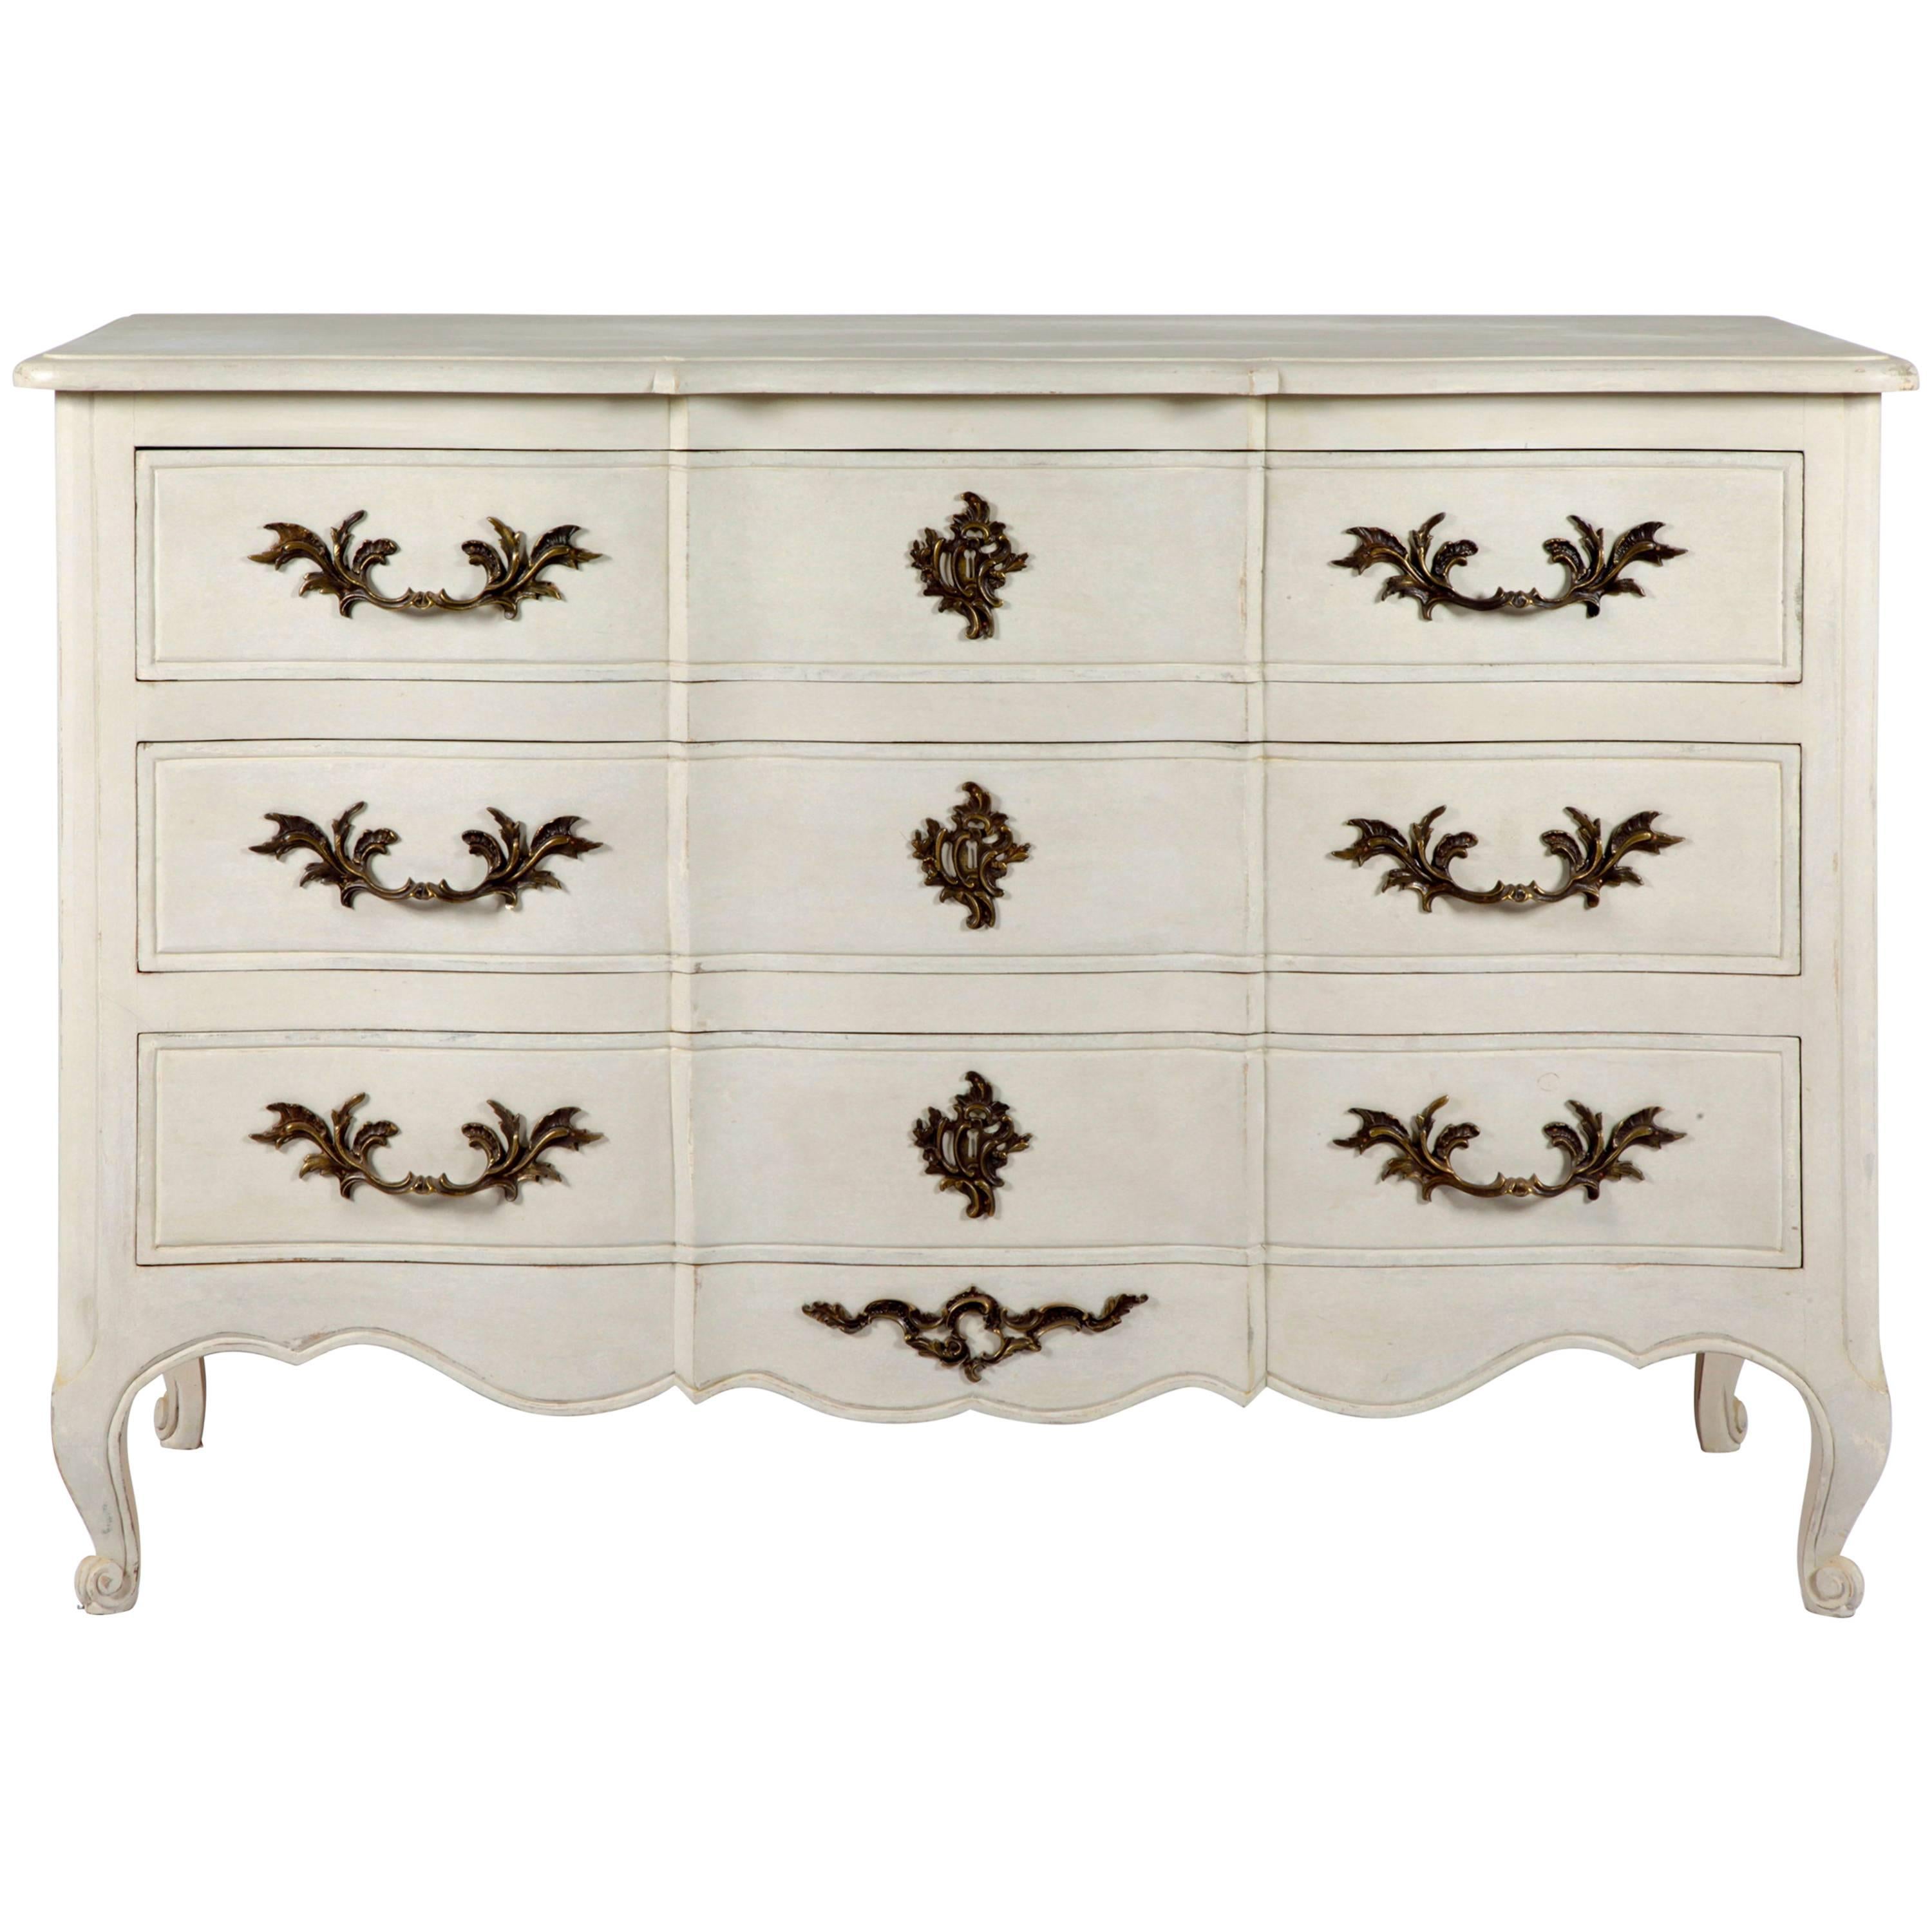 Regence Style painted Chest of Drawers